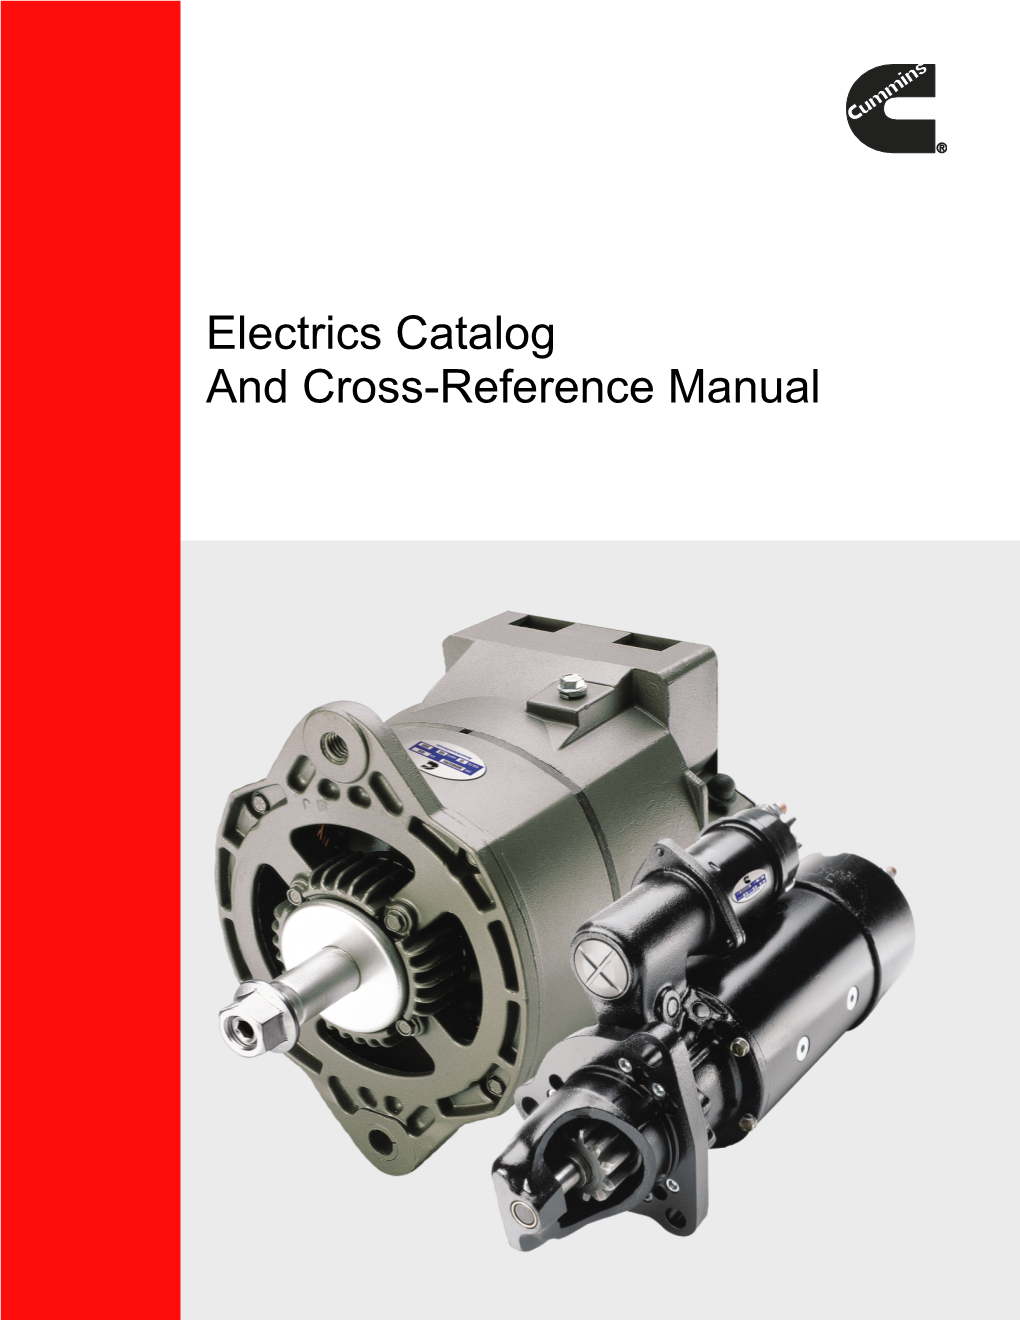 Electrics Catalog and Cross-Reference Manual